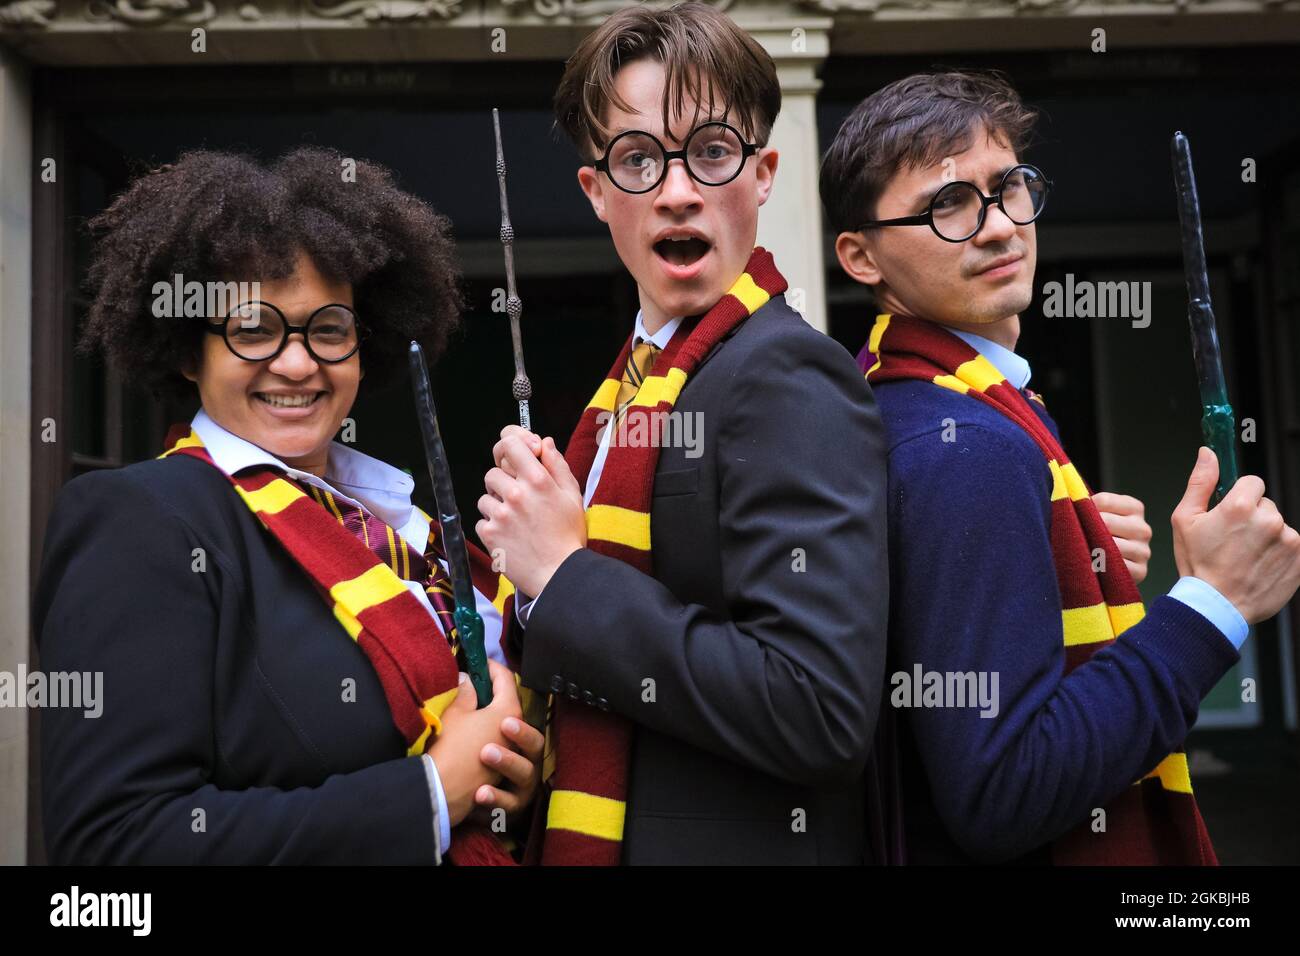 London, UK. 14th Sep, 2021. The acclaimed original cast of ‘Dumbledore Is So Gay' will be returning to serve Harry Potter nostalgia at The Pleasance Theatre this month (Sep 21-26). For the photocall they gather at ZSL London Zoo's Reptile House, an iconic spot from Harry Potter and the Philosopher's Stone, in costumes that celebrate the central character Jack's super-fan status. Reuniting to tell this optimistic story of self-love and friendship are actors Alex Britt as Jack, Max Percy as Ollie/Martin and Charlotte Dowding as Gemma/Sally/Madame DuBois. Credit: Imageplotter/Alamy Live News Stock Photo